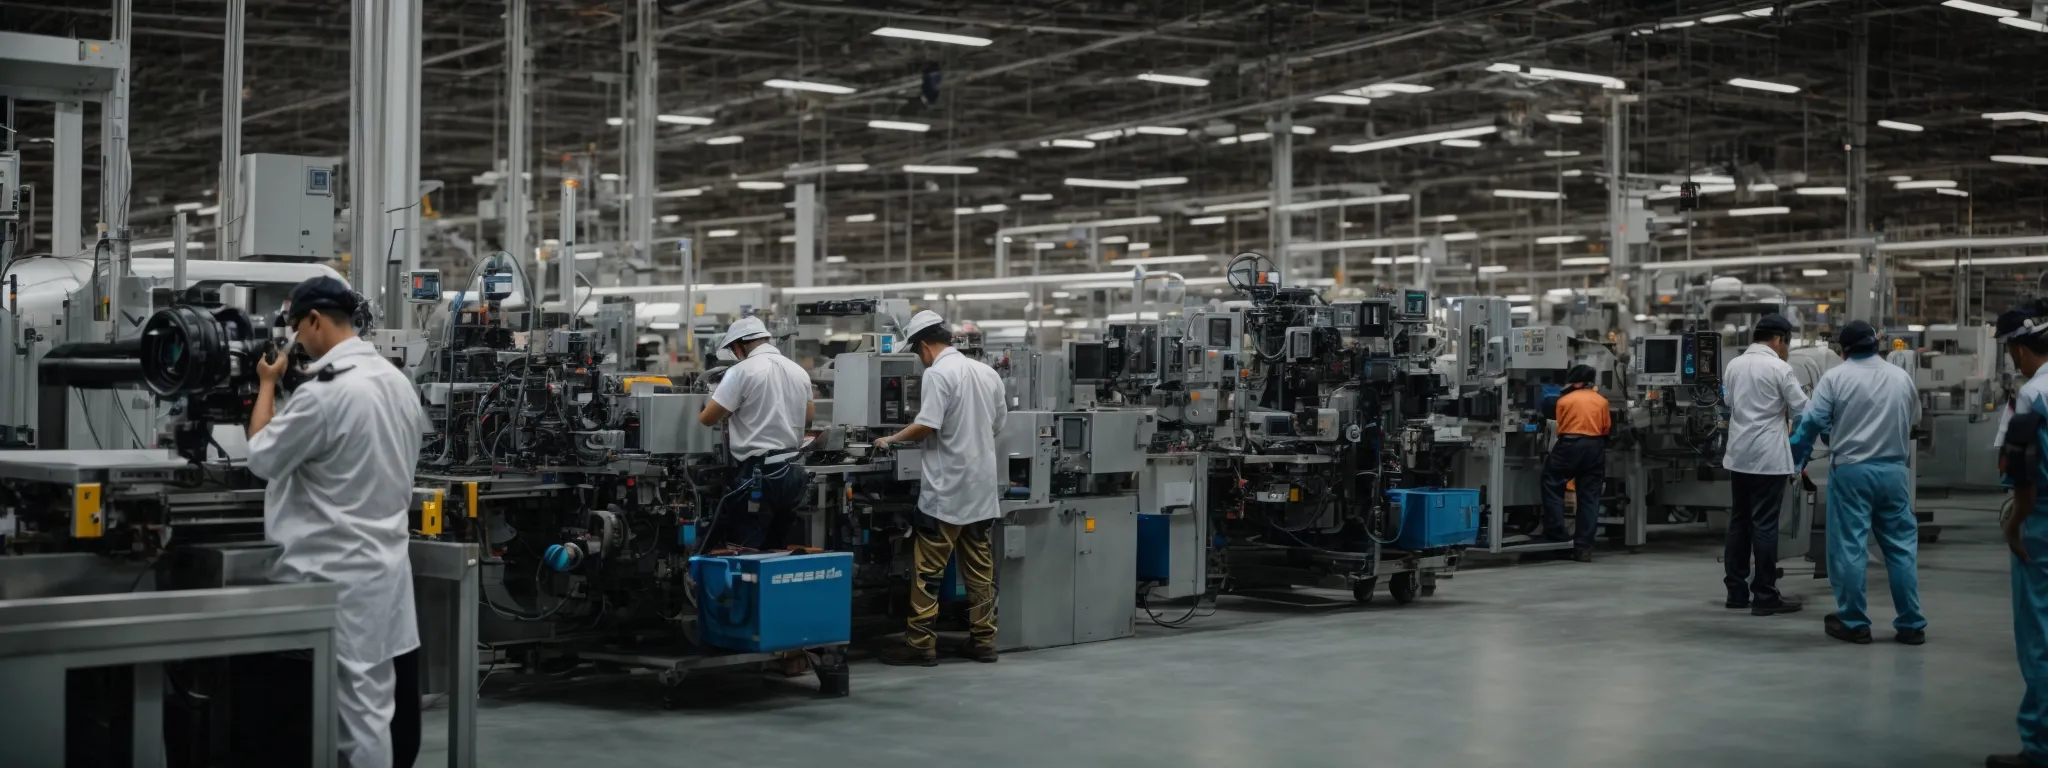 a professional videographer films an elaborate manufacturing assembly line as workers seamlessly operate machinery.